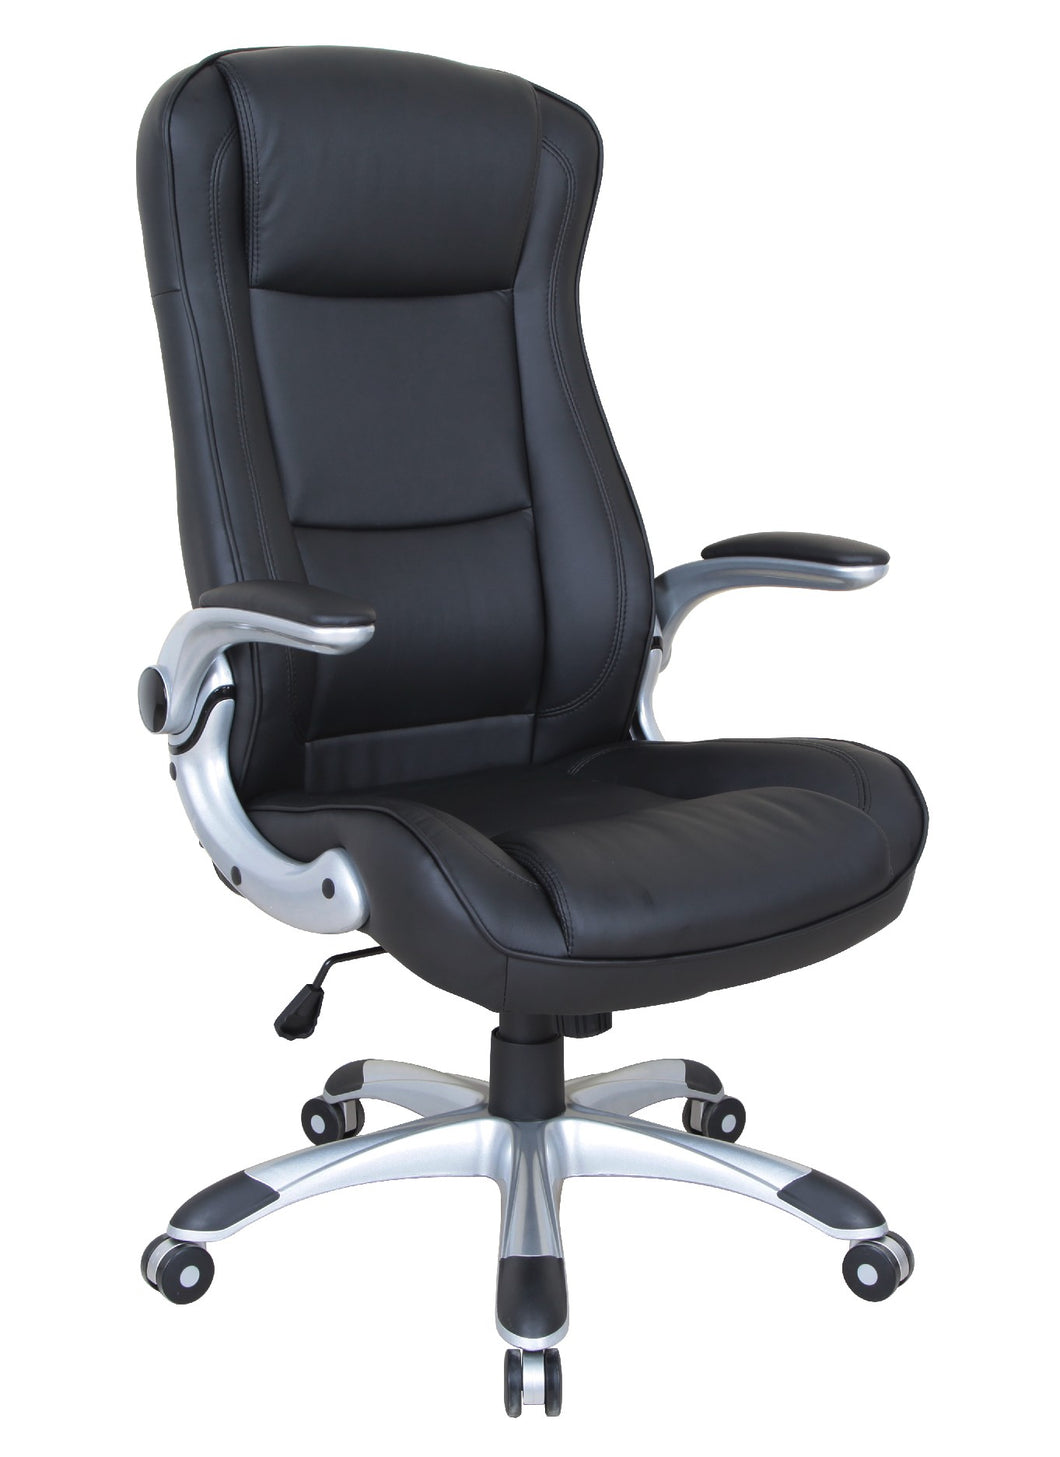 OFFICE SERIES/ H02 COMPUTER OFFICE CHAIR (BLACK)